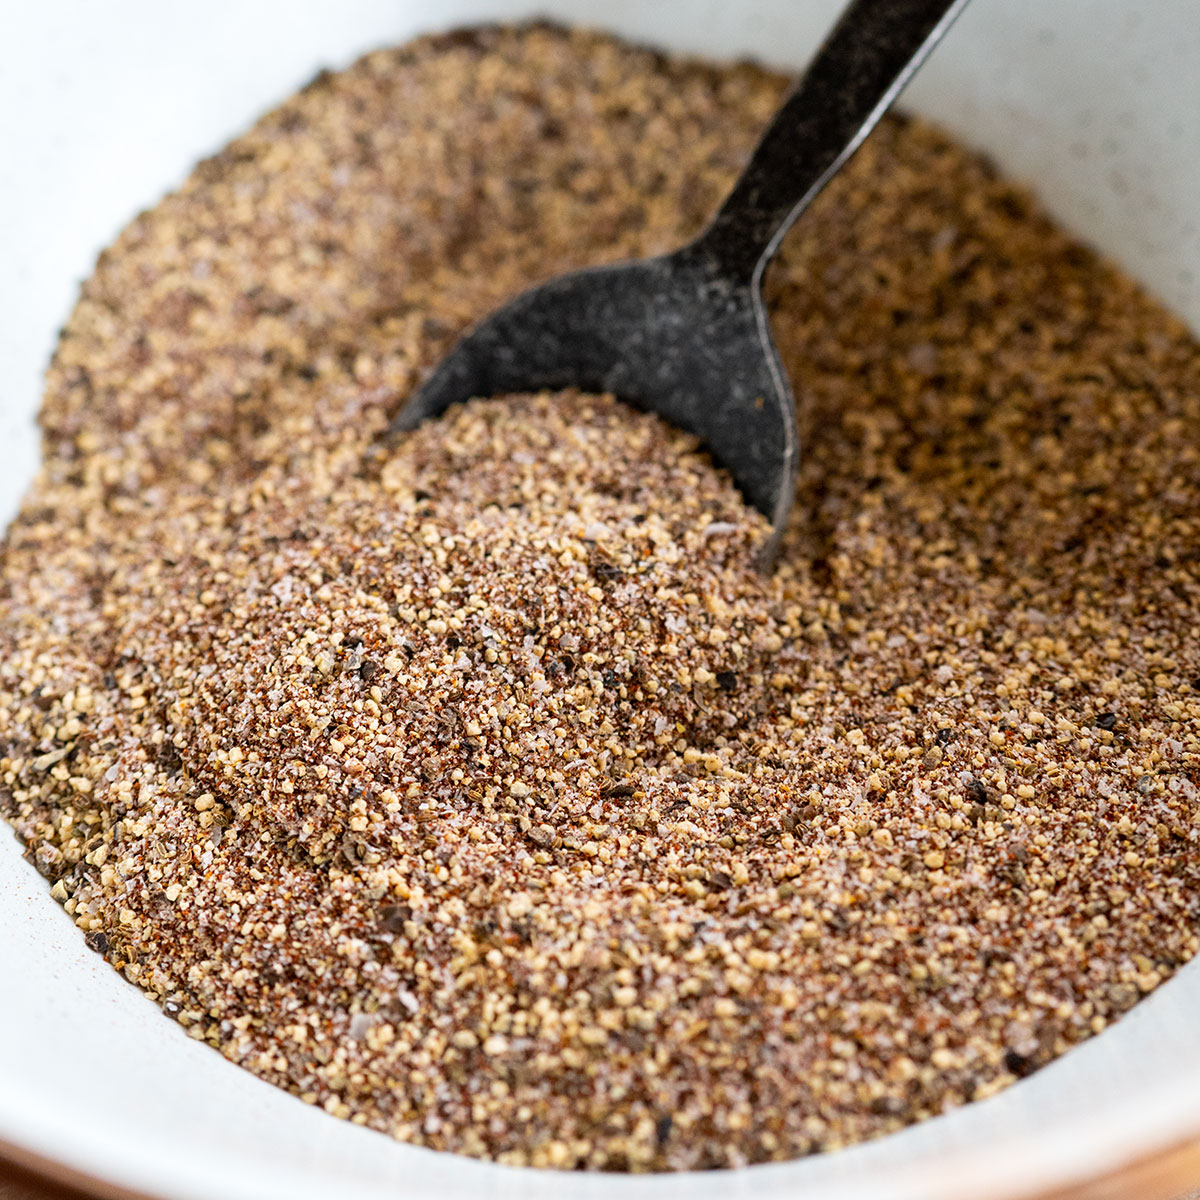 all-purpose BBQ rub combined in bowl.